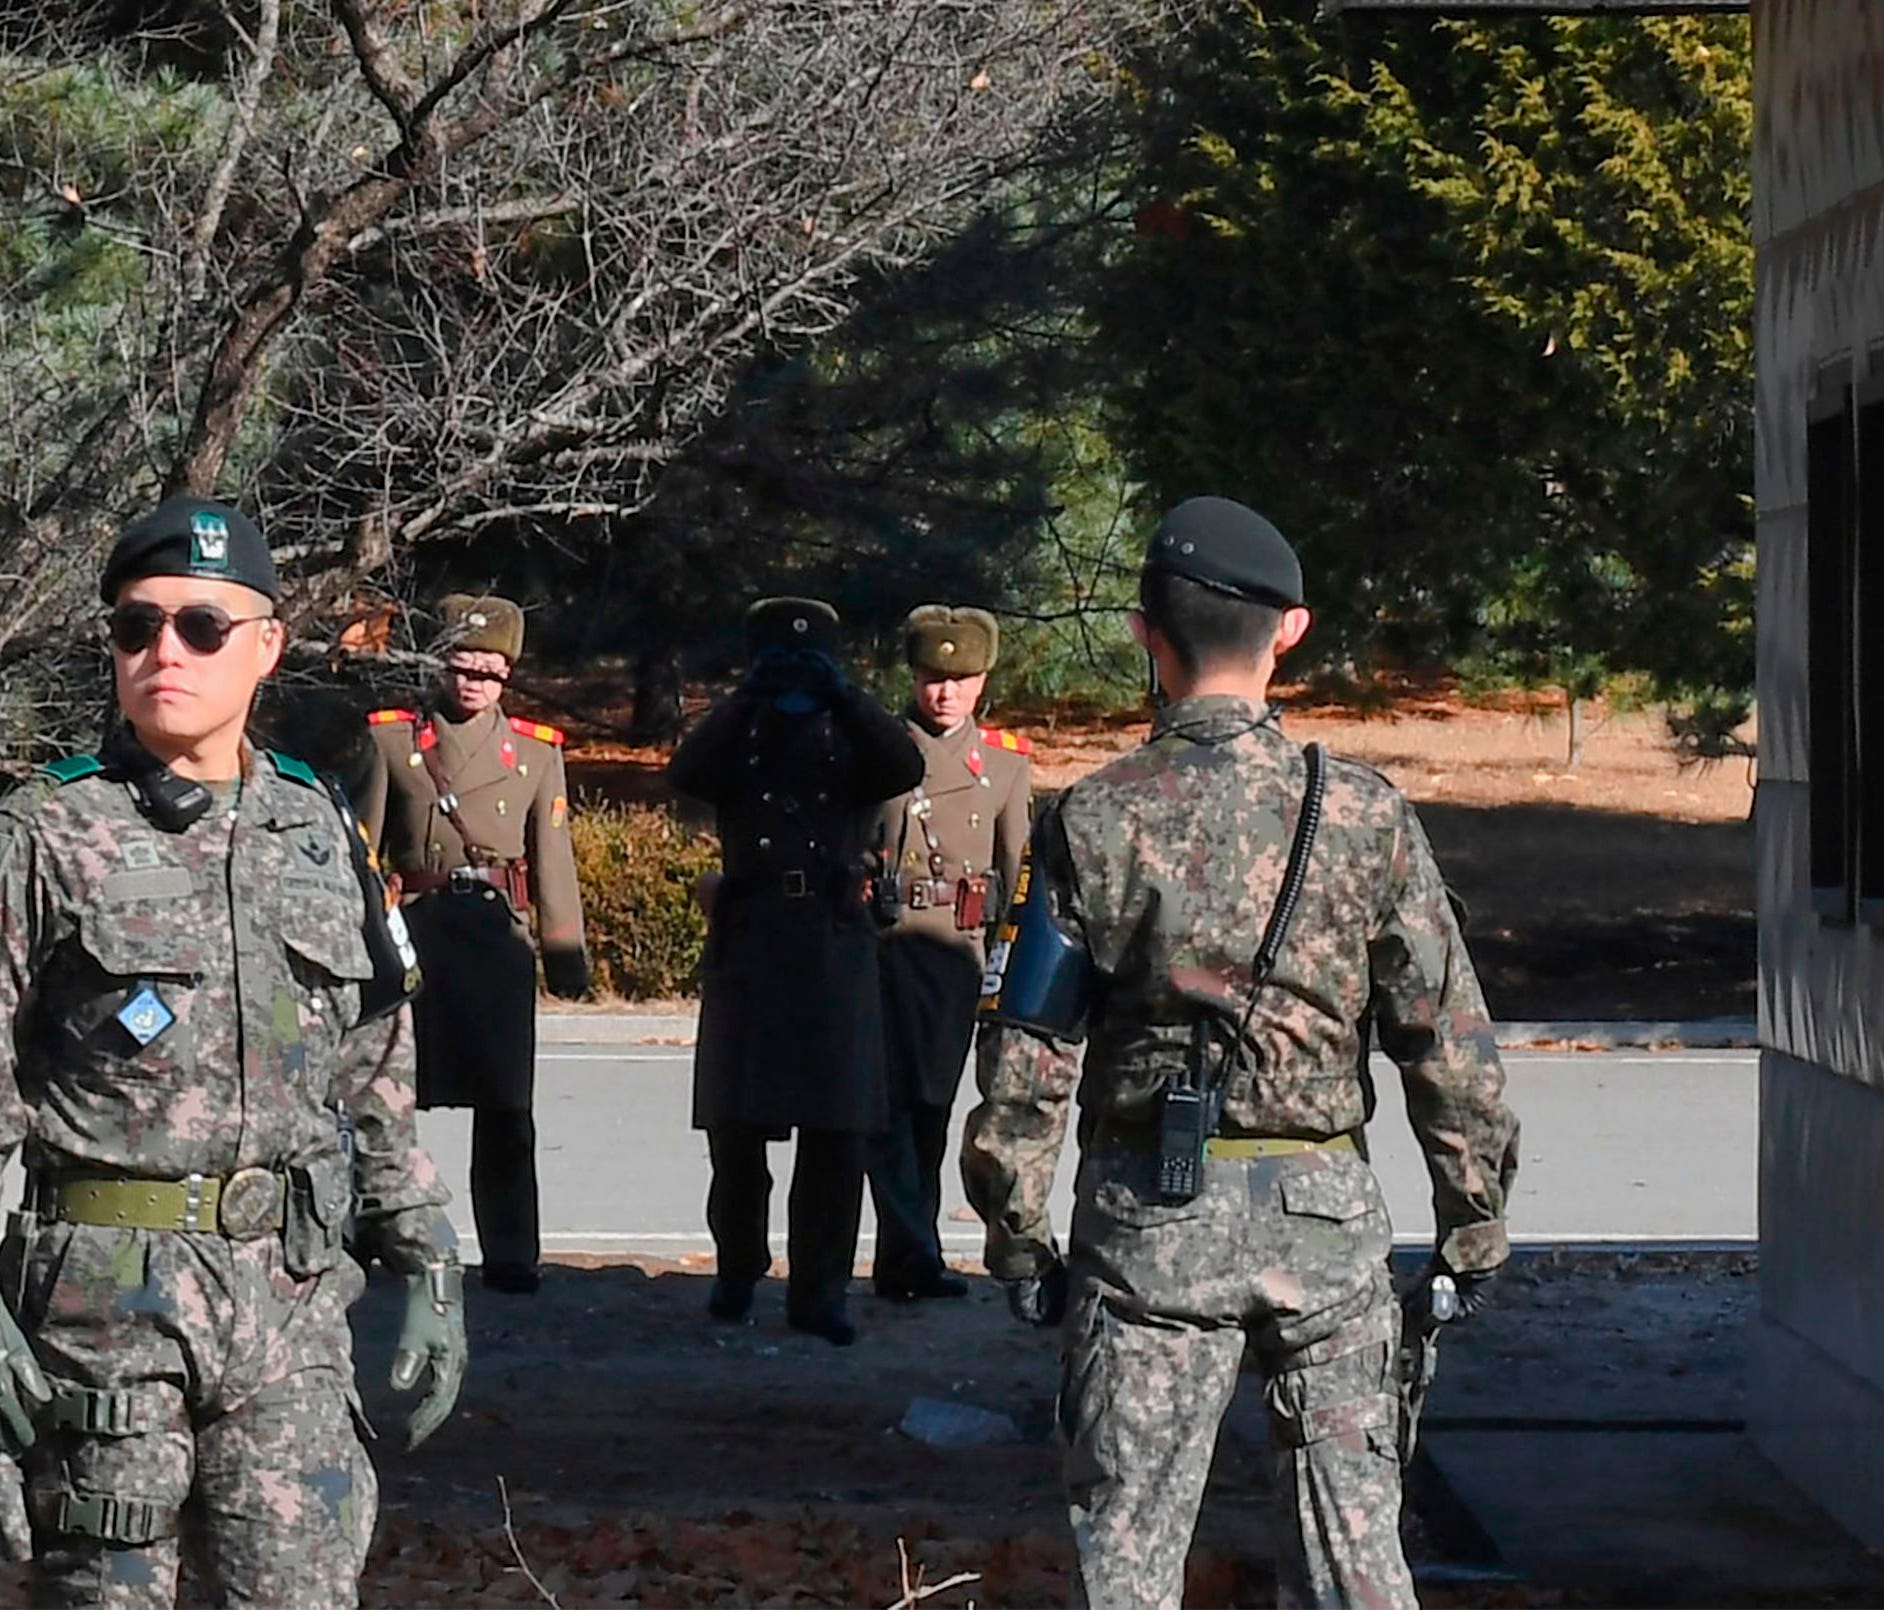 North Korean soldiers stare at South Korean soldiers at the truce village of Panmunjom in the Demilitarized Zone dividing the two Koreas on Nov. 27, 2017.